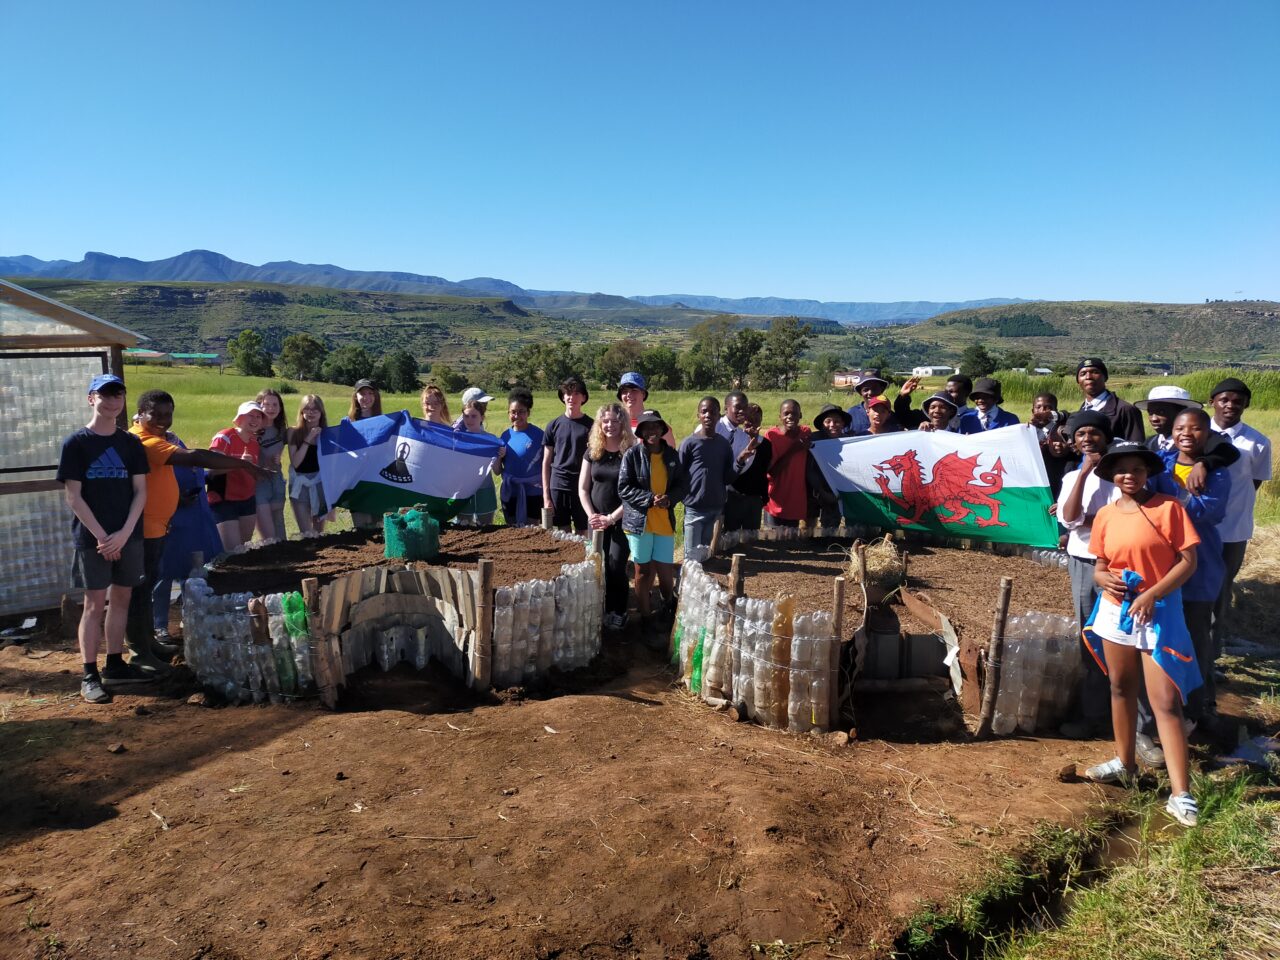 A large group posing for a photo and holding Welsh and Lesotho flags. There is a clear blue sky and green spaces in the background.